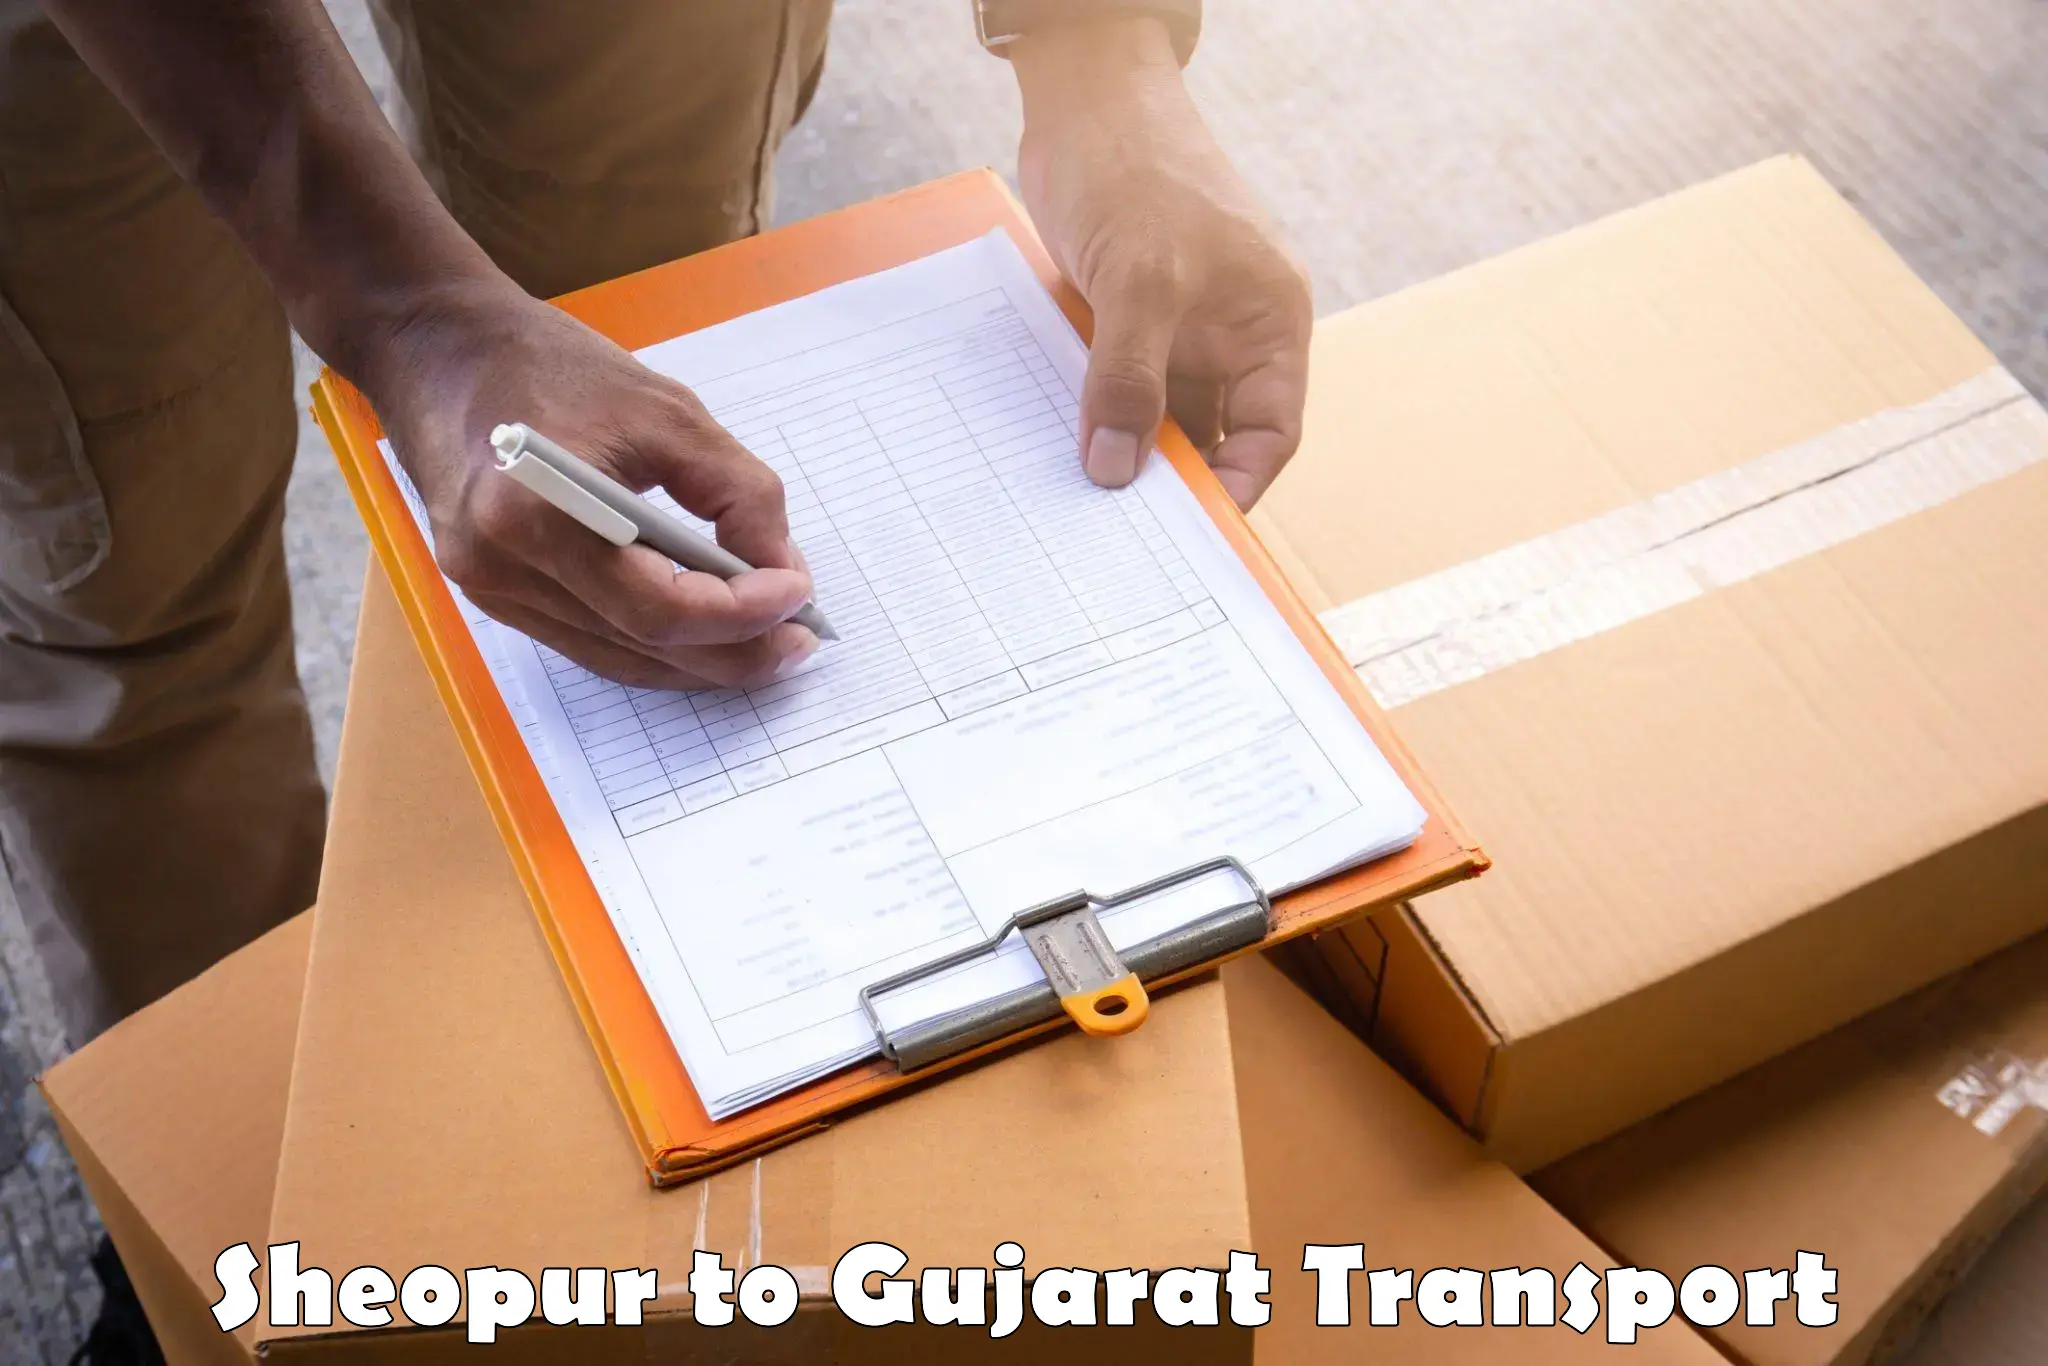 Luggage transport services Sheopur to Patan Gujarat